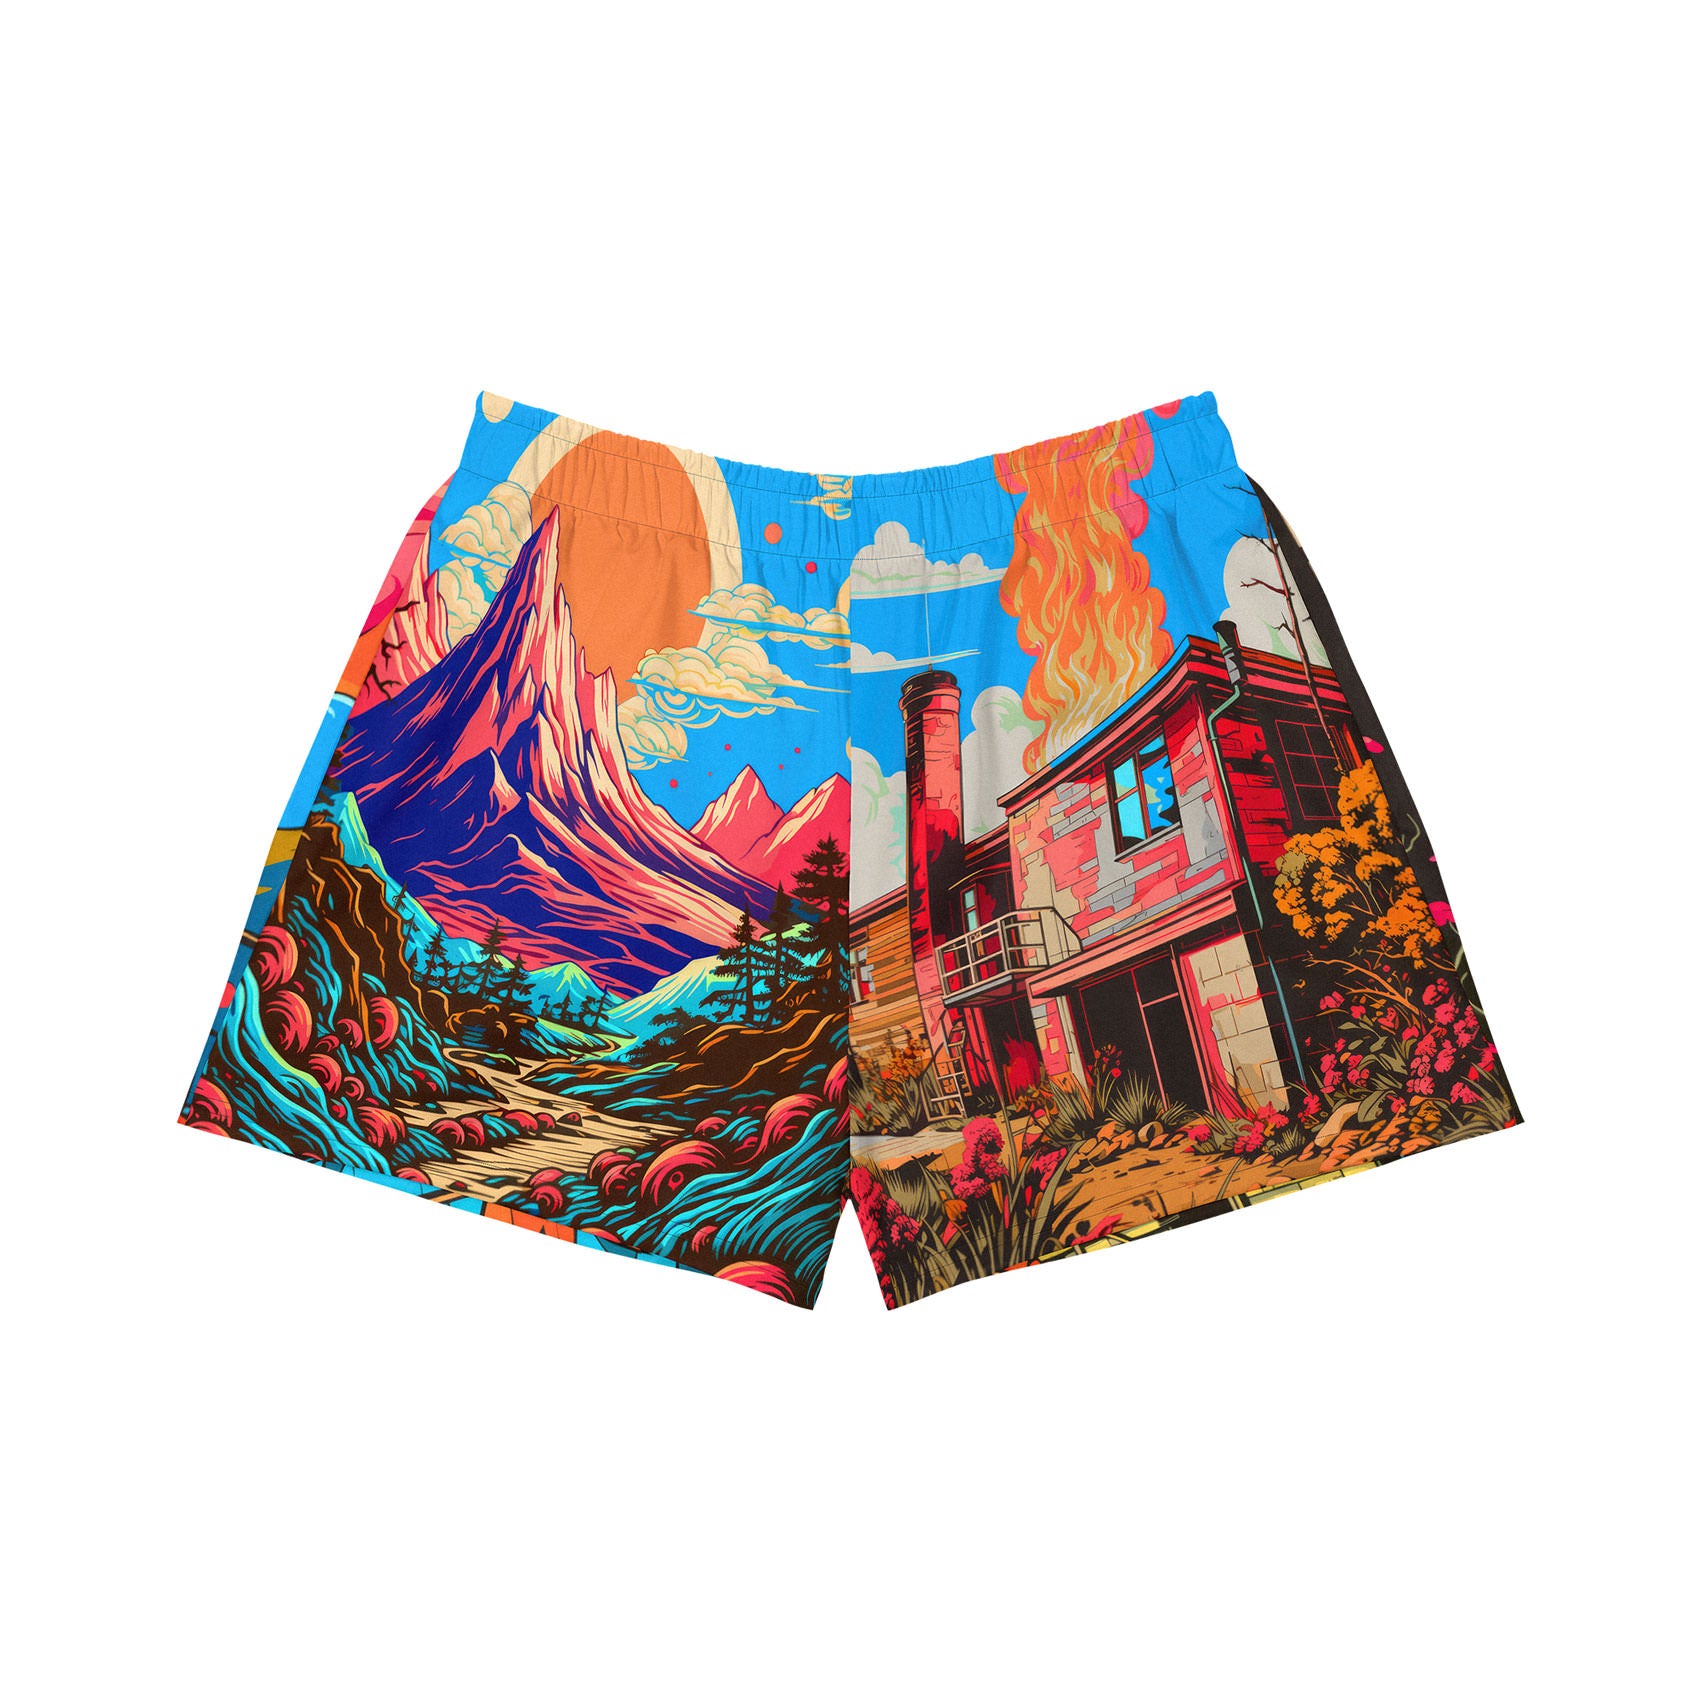 Season is an athletic women's short, comfy and made from such a versatile fabric that you won't feel out of place at any sports event. And, of course, they have pockets. Each piece is meticulously printed, cut, and hand-sewn.